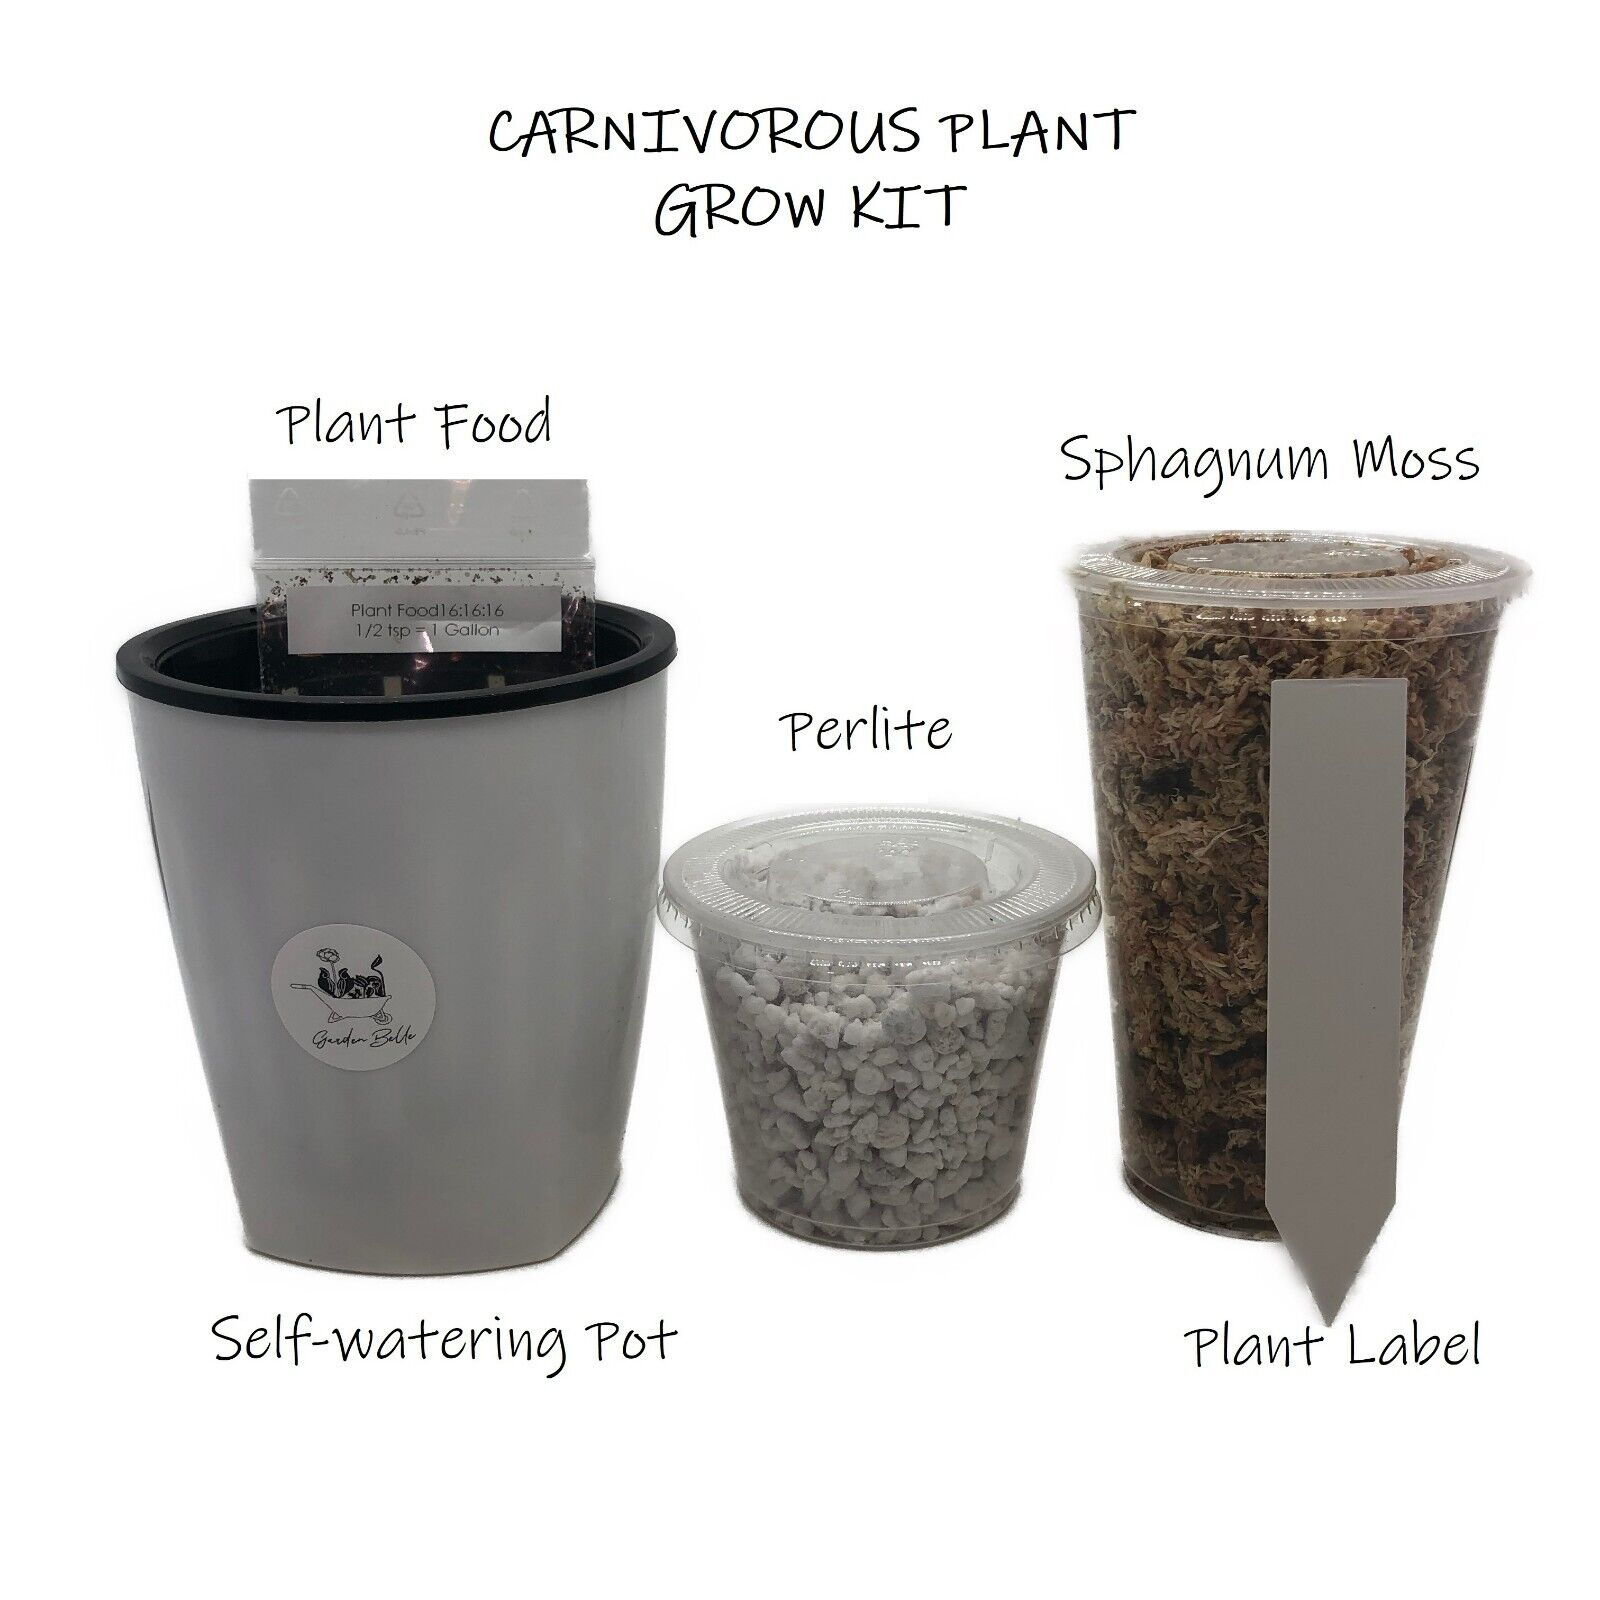 Carnivorous Plant Growing Kit With Self-Watering Pot, Soil And Maxsea Fertilizer